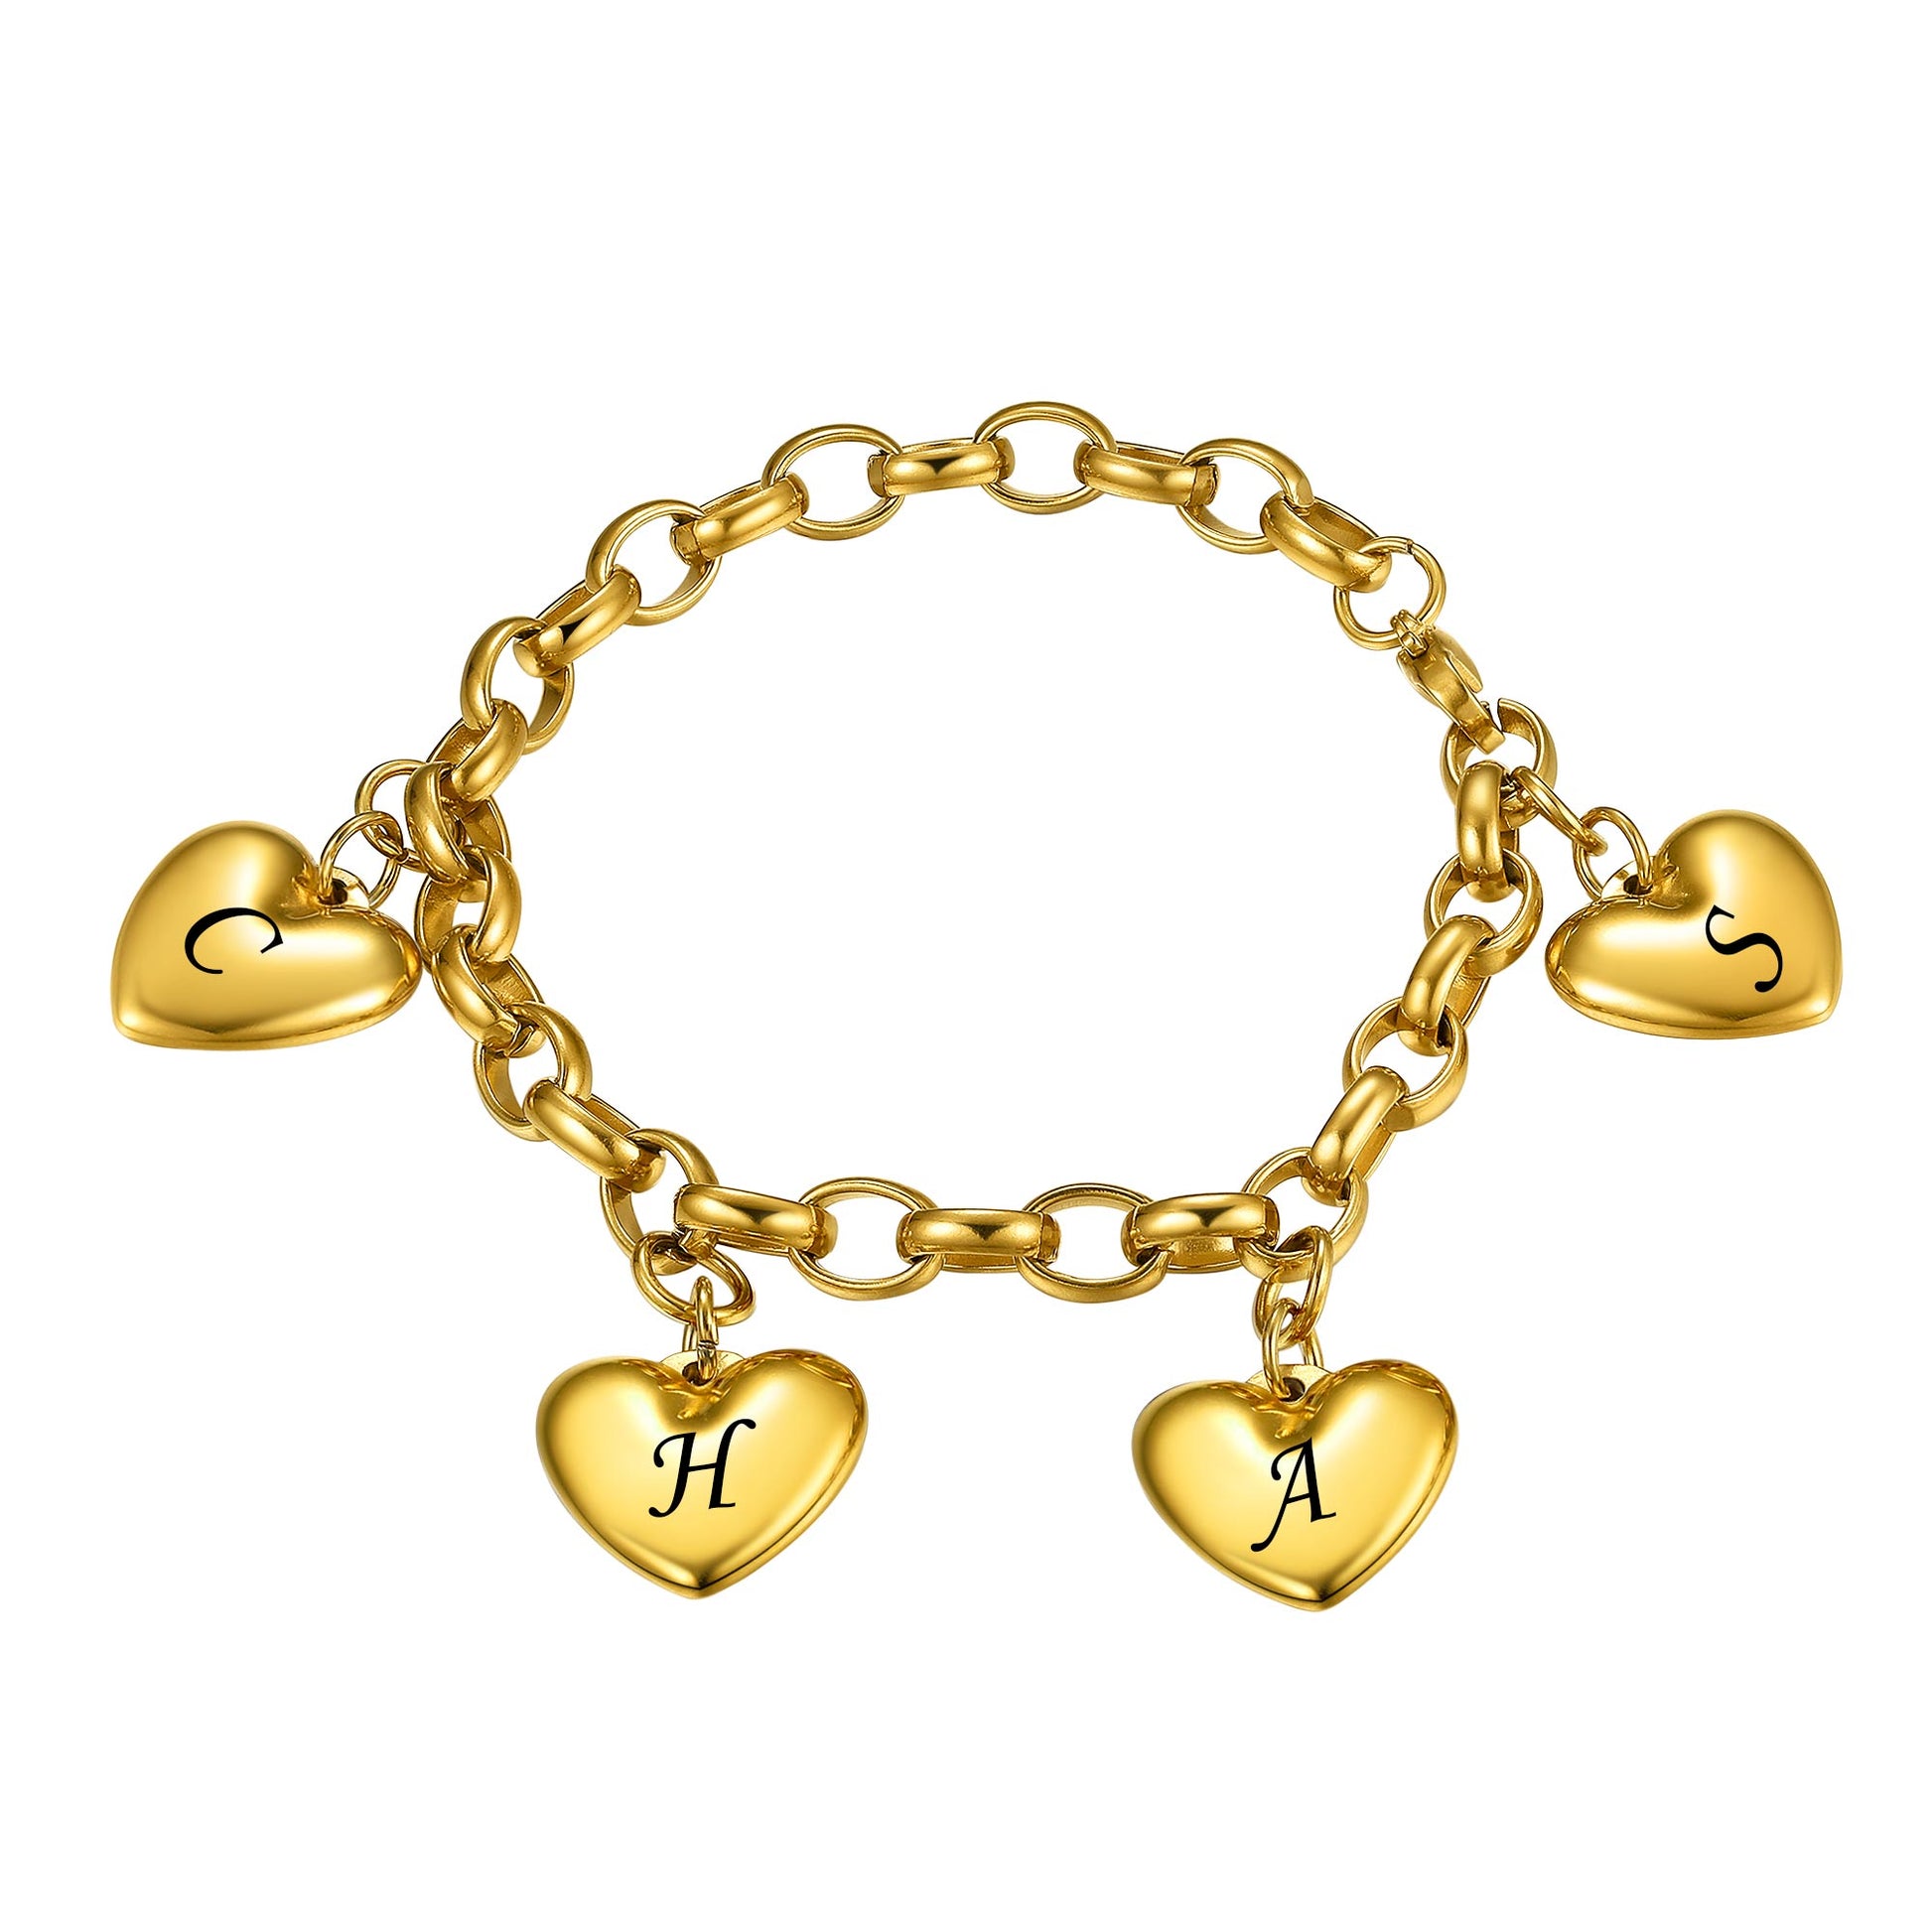 Personalized Engraved Hearts Charm Bracelet 4 heart gold